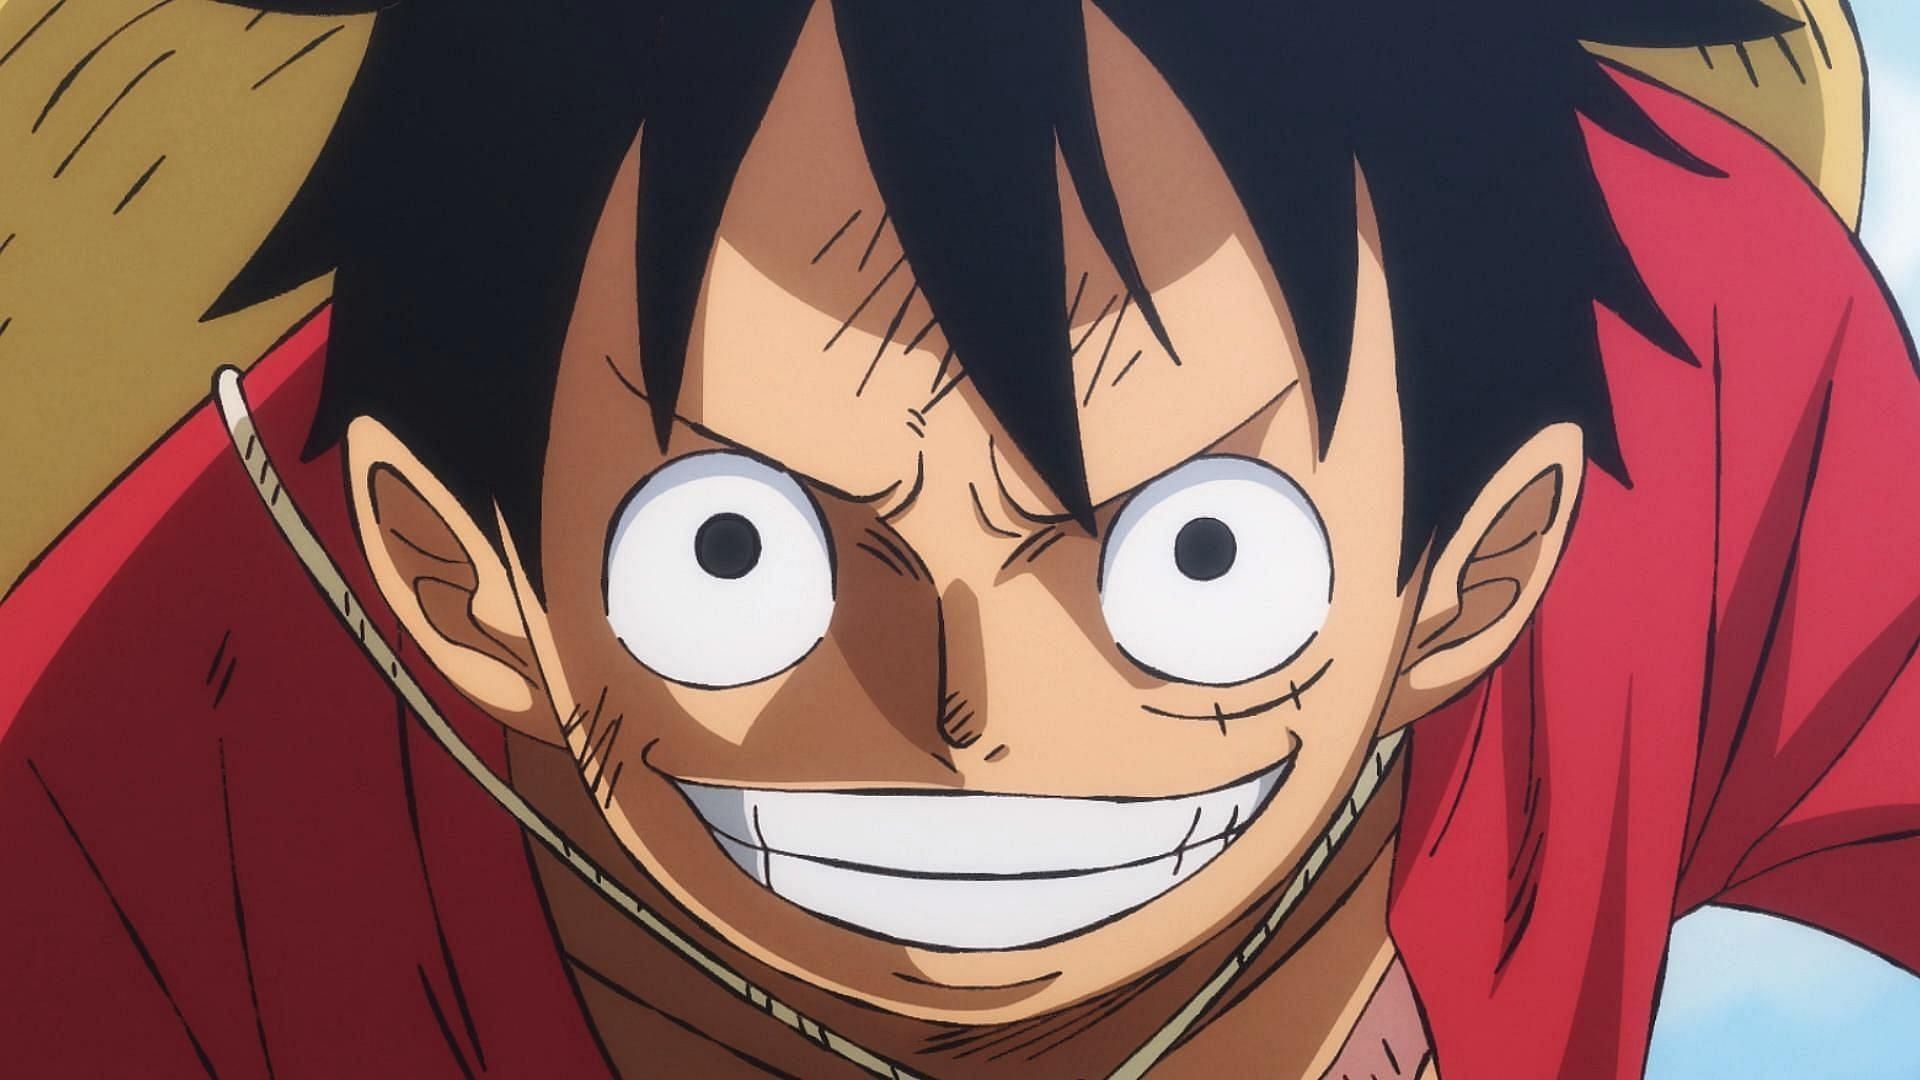 Monkey D. Luffy as seen in One Piece (Image via Toei Animation)